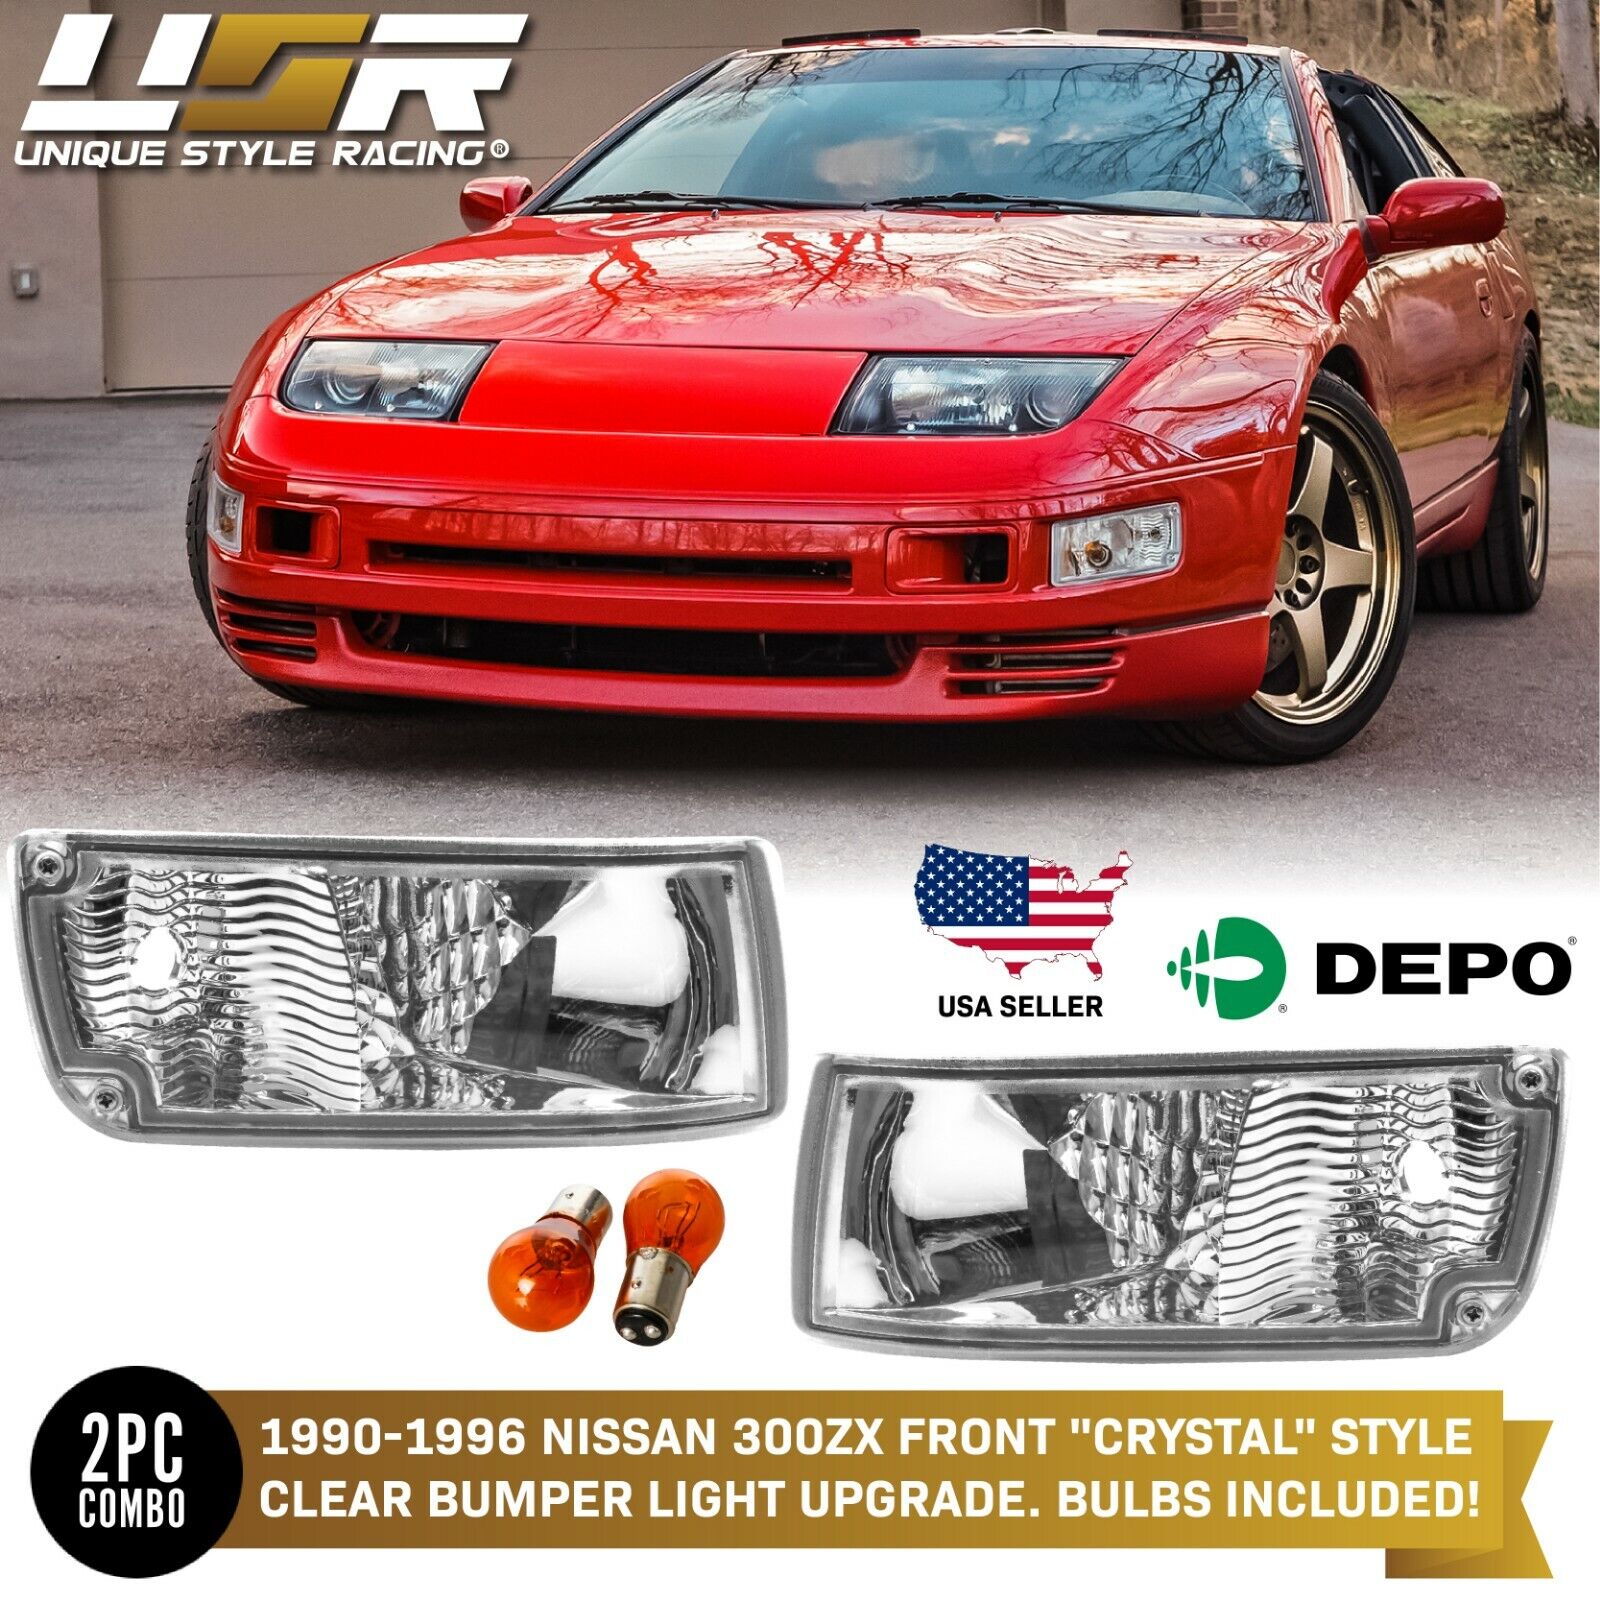 DEPO JDM Pair of Clear Bumper Signal Light For 1990-1996 Nissan 300ZX Z Z32